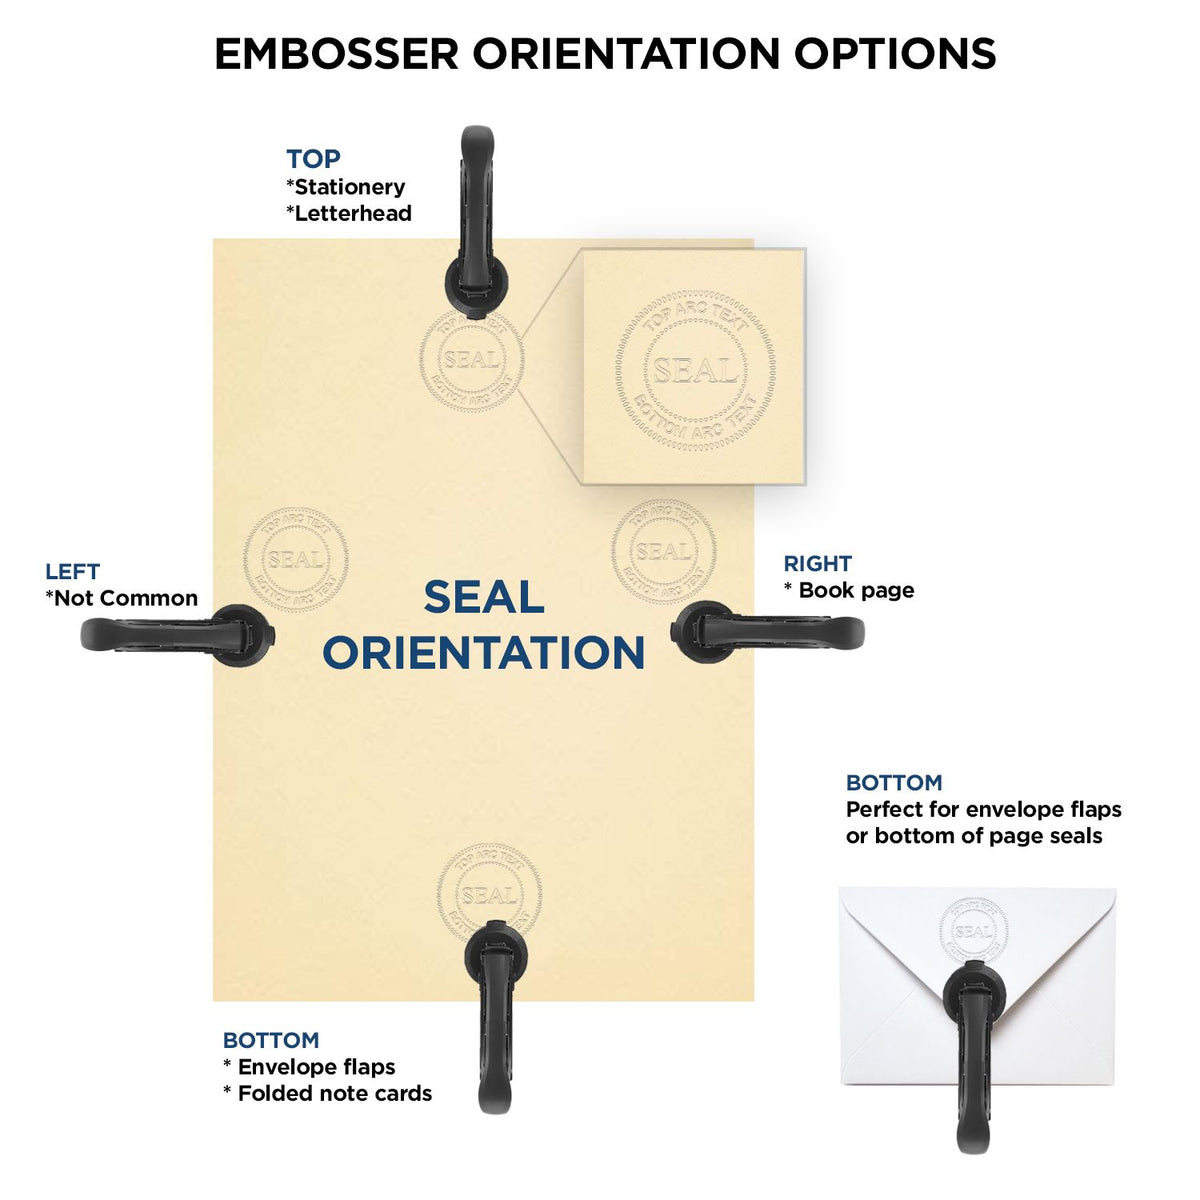 An infographic for the Soft Pocket Alabama Landscape Architect Embosser showing embosser orientation, this is showing examples of a top, bottom, right and left insert.